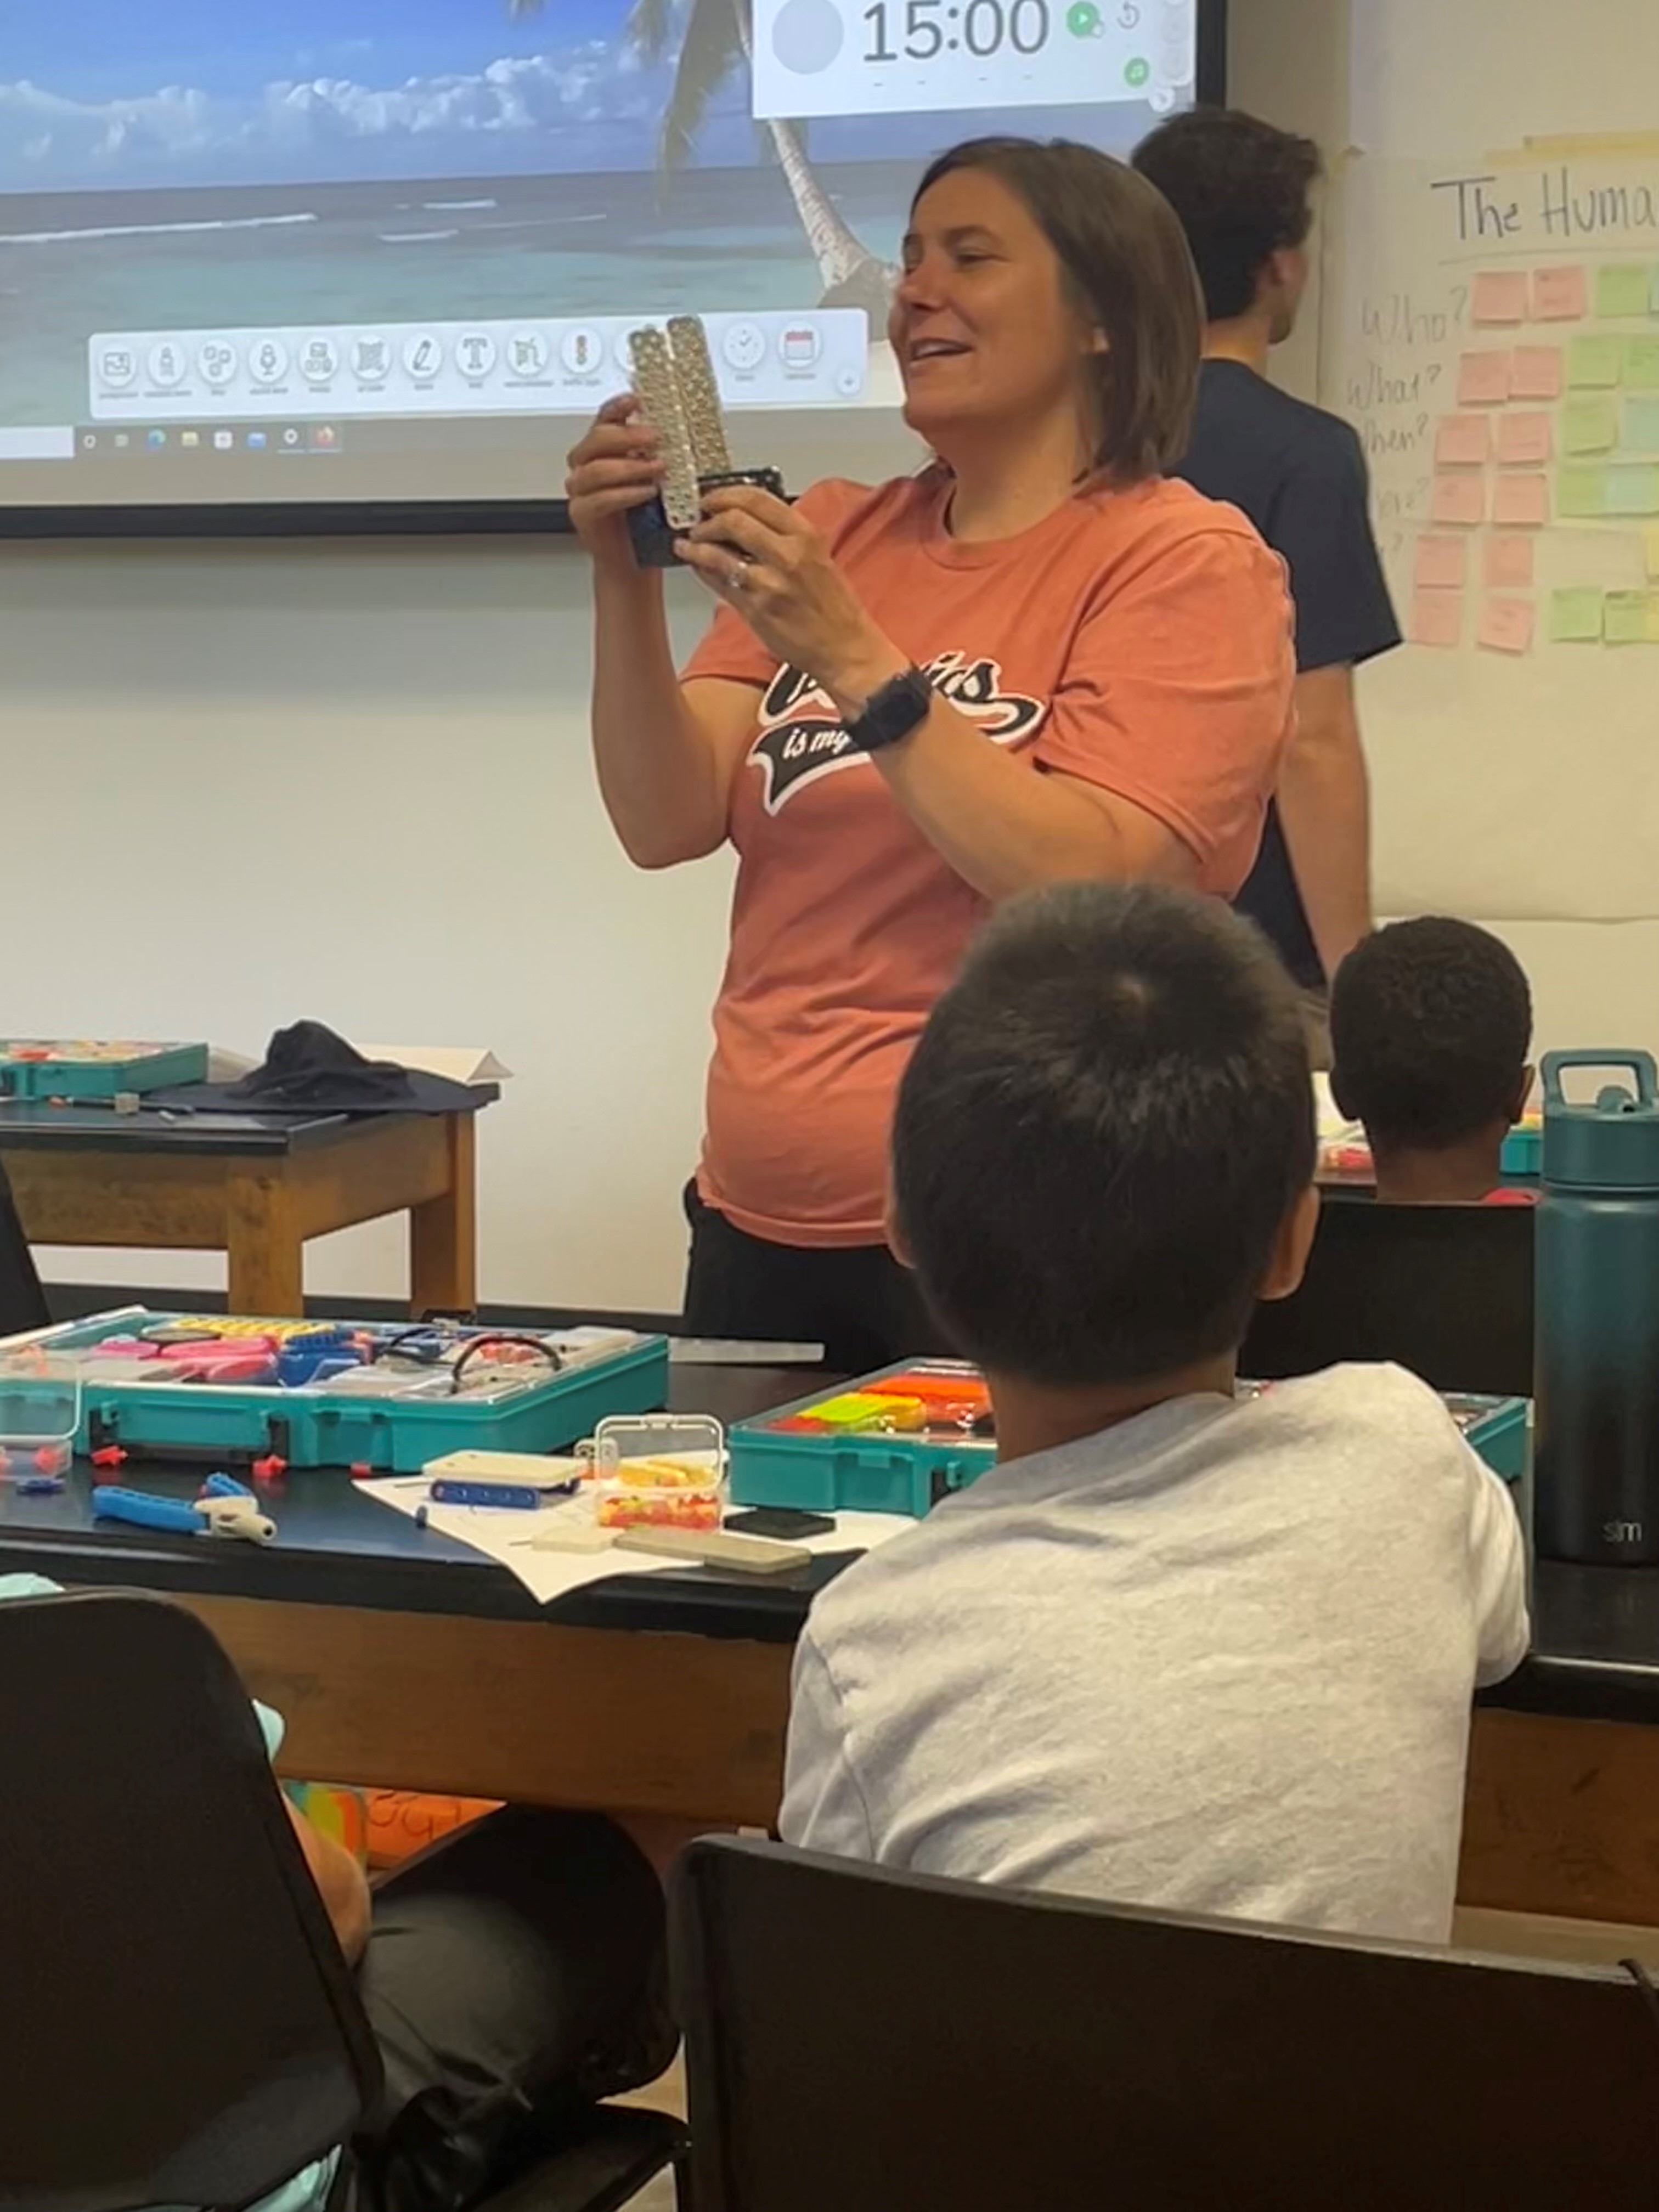 Lead VEX GO instructor Tina Williams, an educator at Yarbrough Elementary School, discusses ways to improve the robotics spaceship at VEX GO camp.